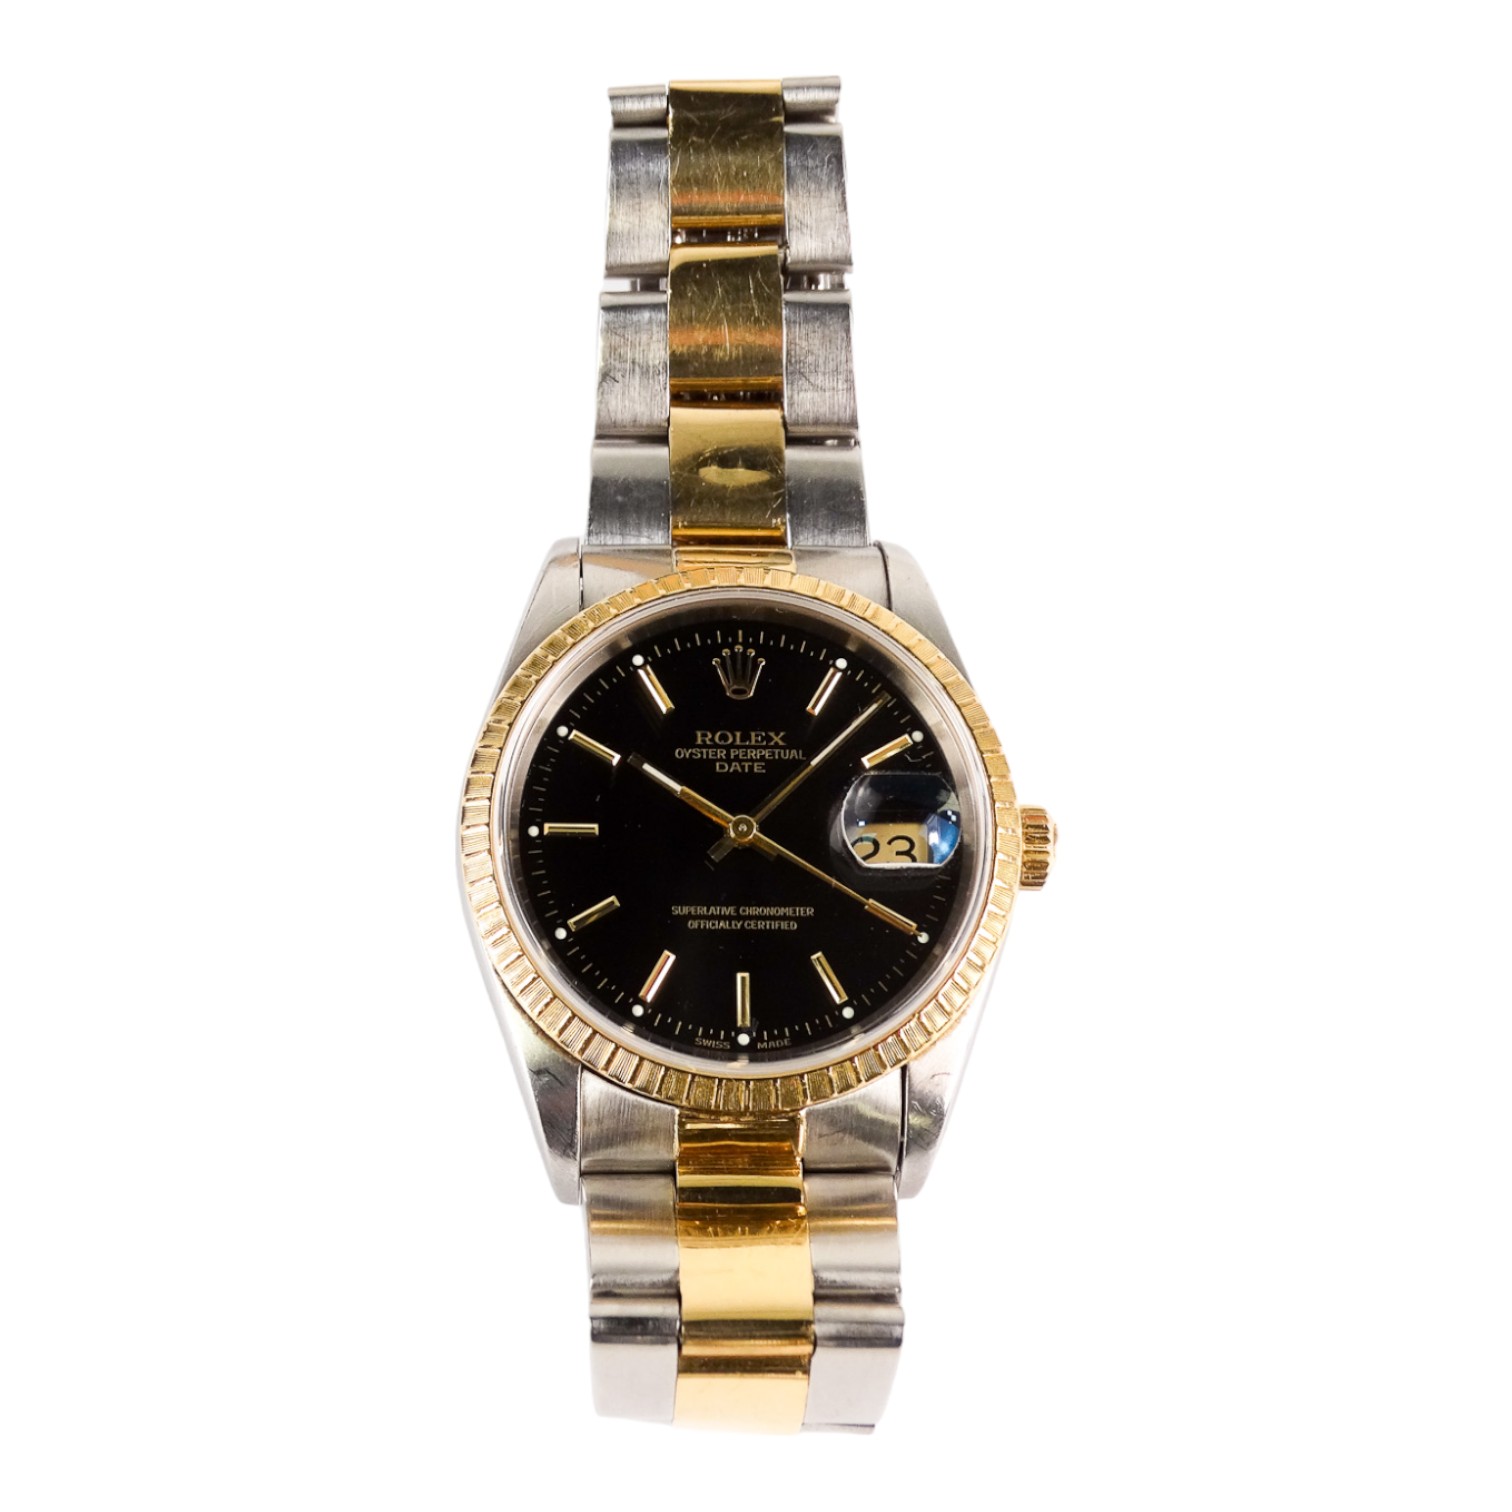 A Rolex Oyster Perpetual Datejust automatic wristwatch chronometer - the black dial with gold